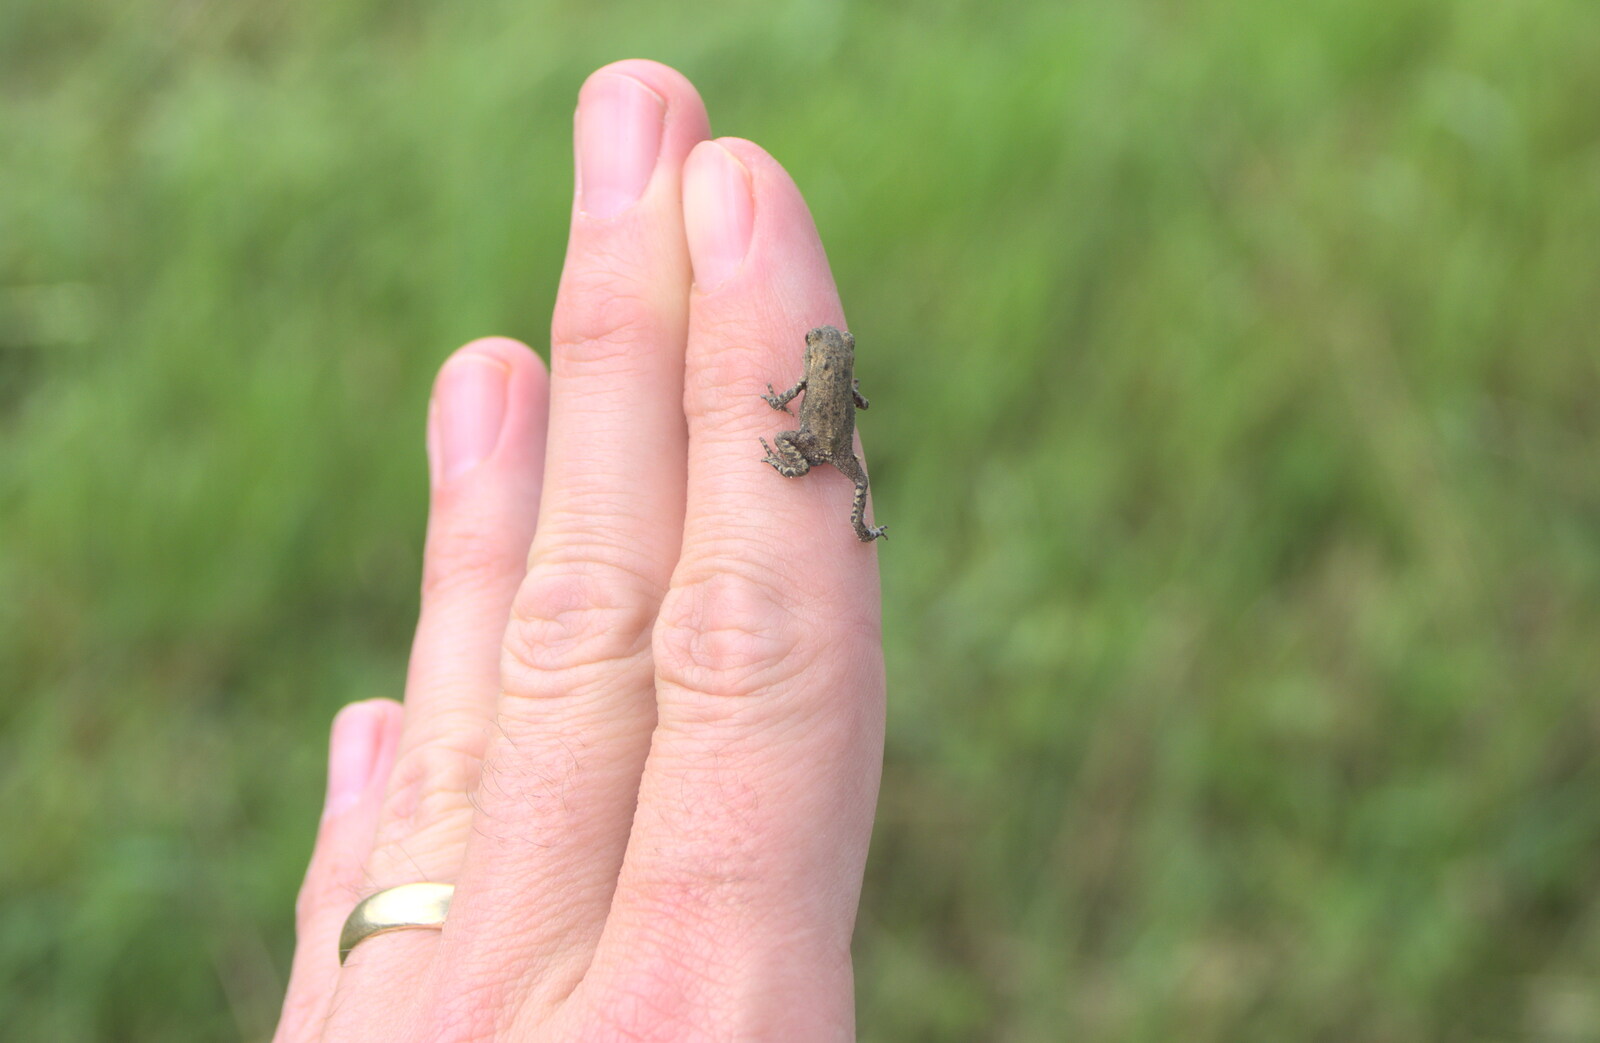 A Tuscan Winery and a Trip to Siena, Tuscany, Italy - 10th June 2013: Hundreds of tiny toadlets hop around on the drive